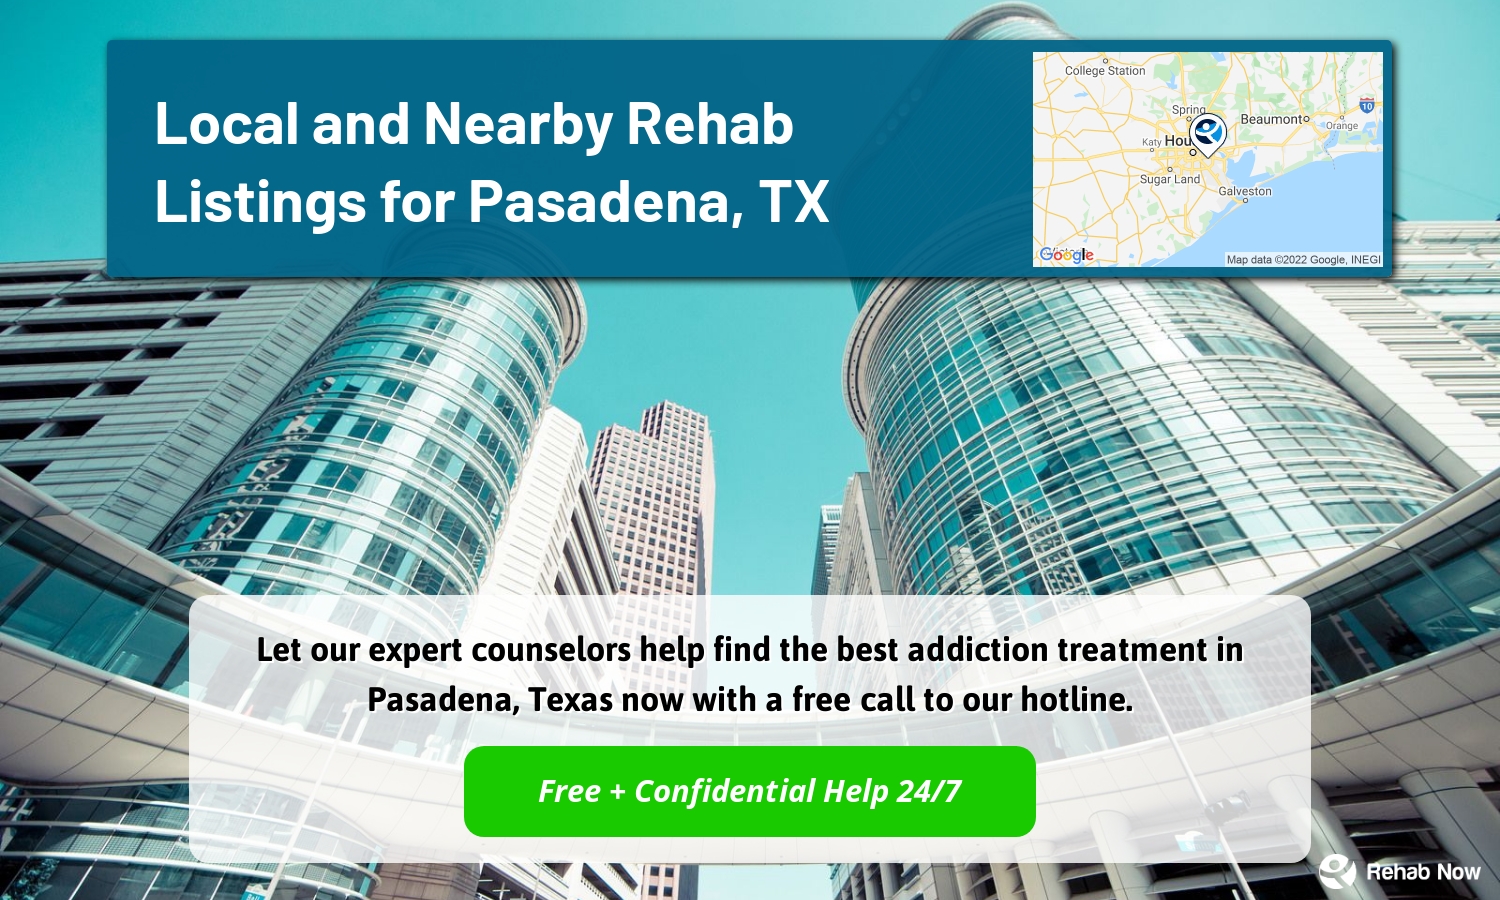 Let our expert counselors help find the best addiction treatment in Pasadena, Texas now with a free call to our hotline.